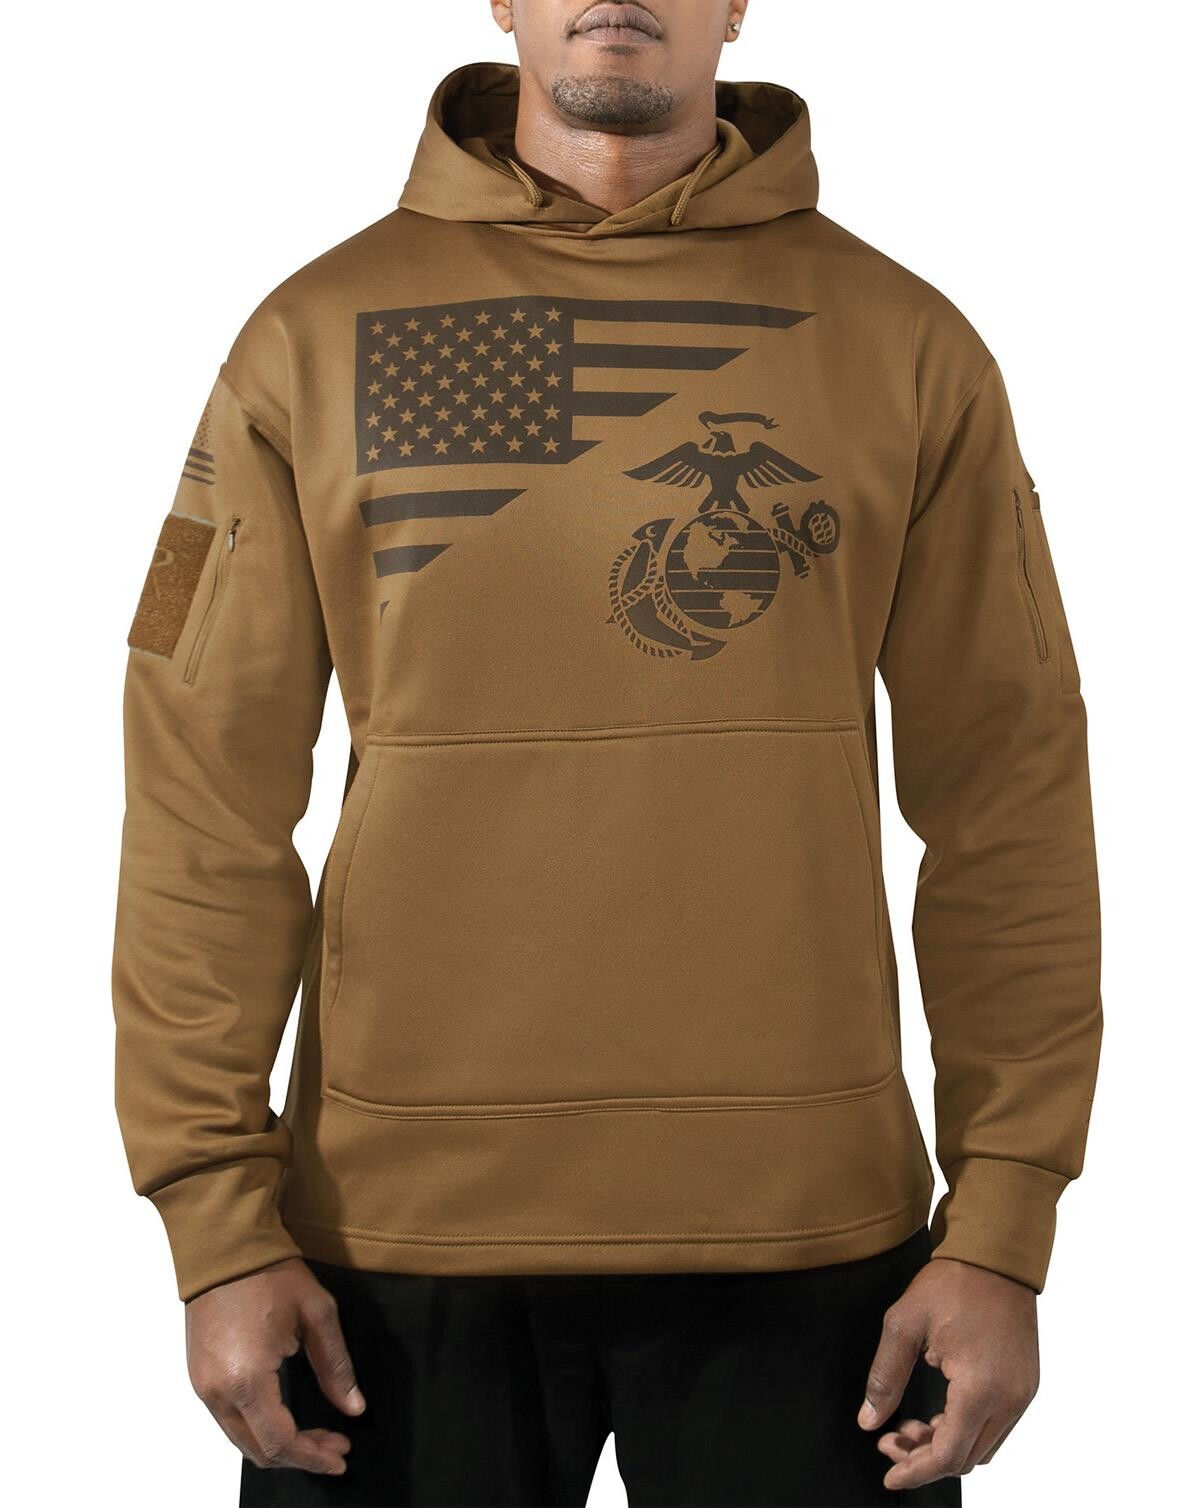 Rothco US Flag Concealed Carry Hoodie (Coyote Brun, 3XL)